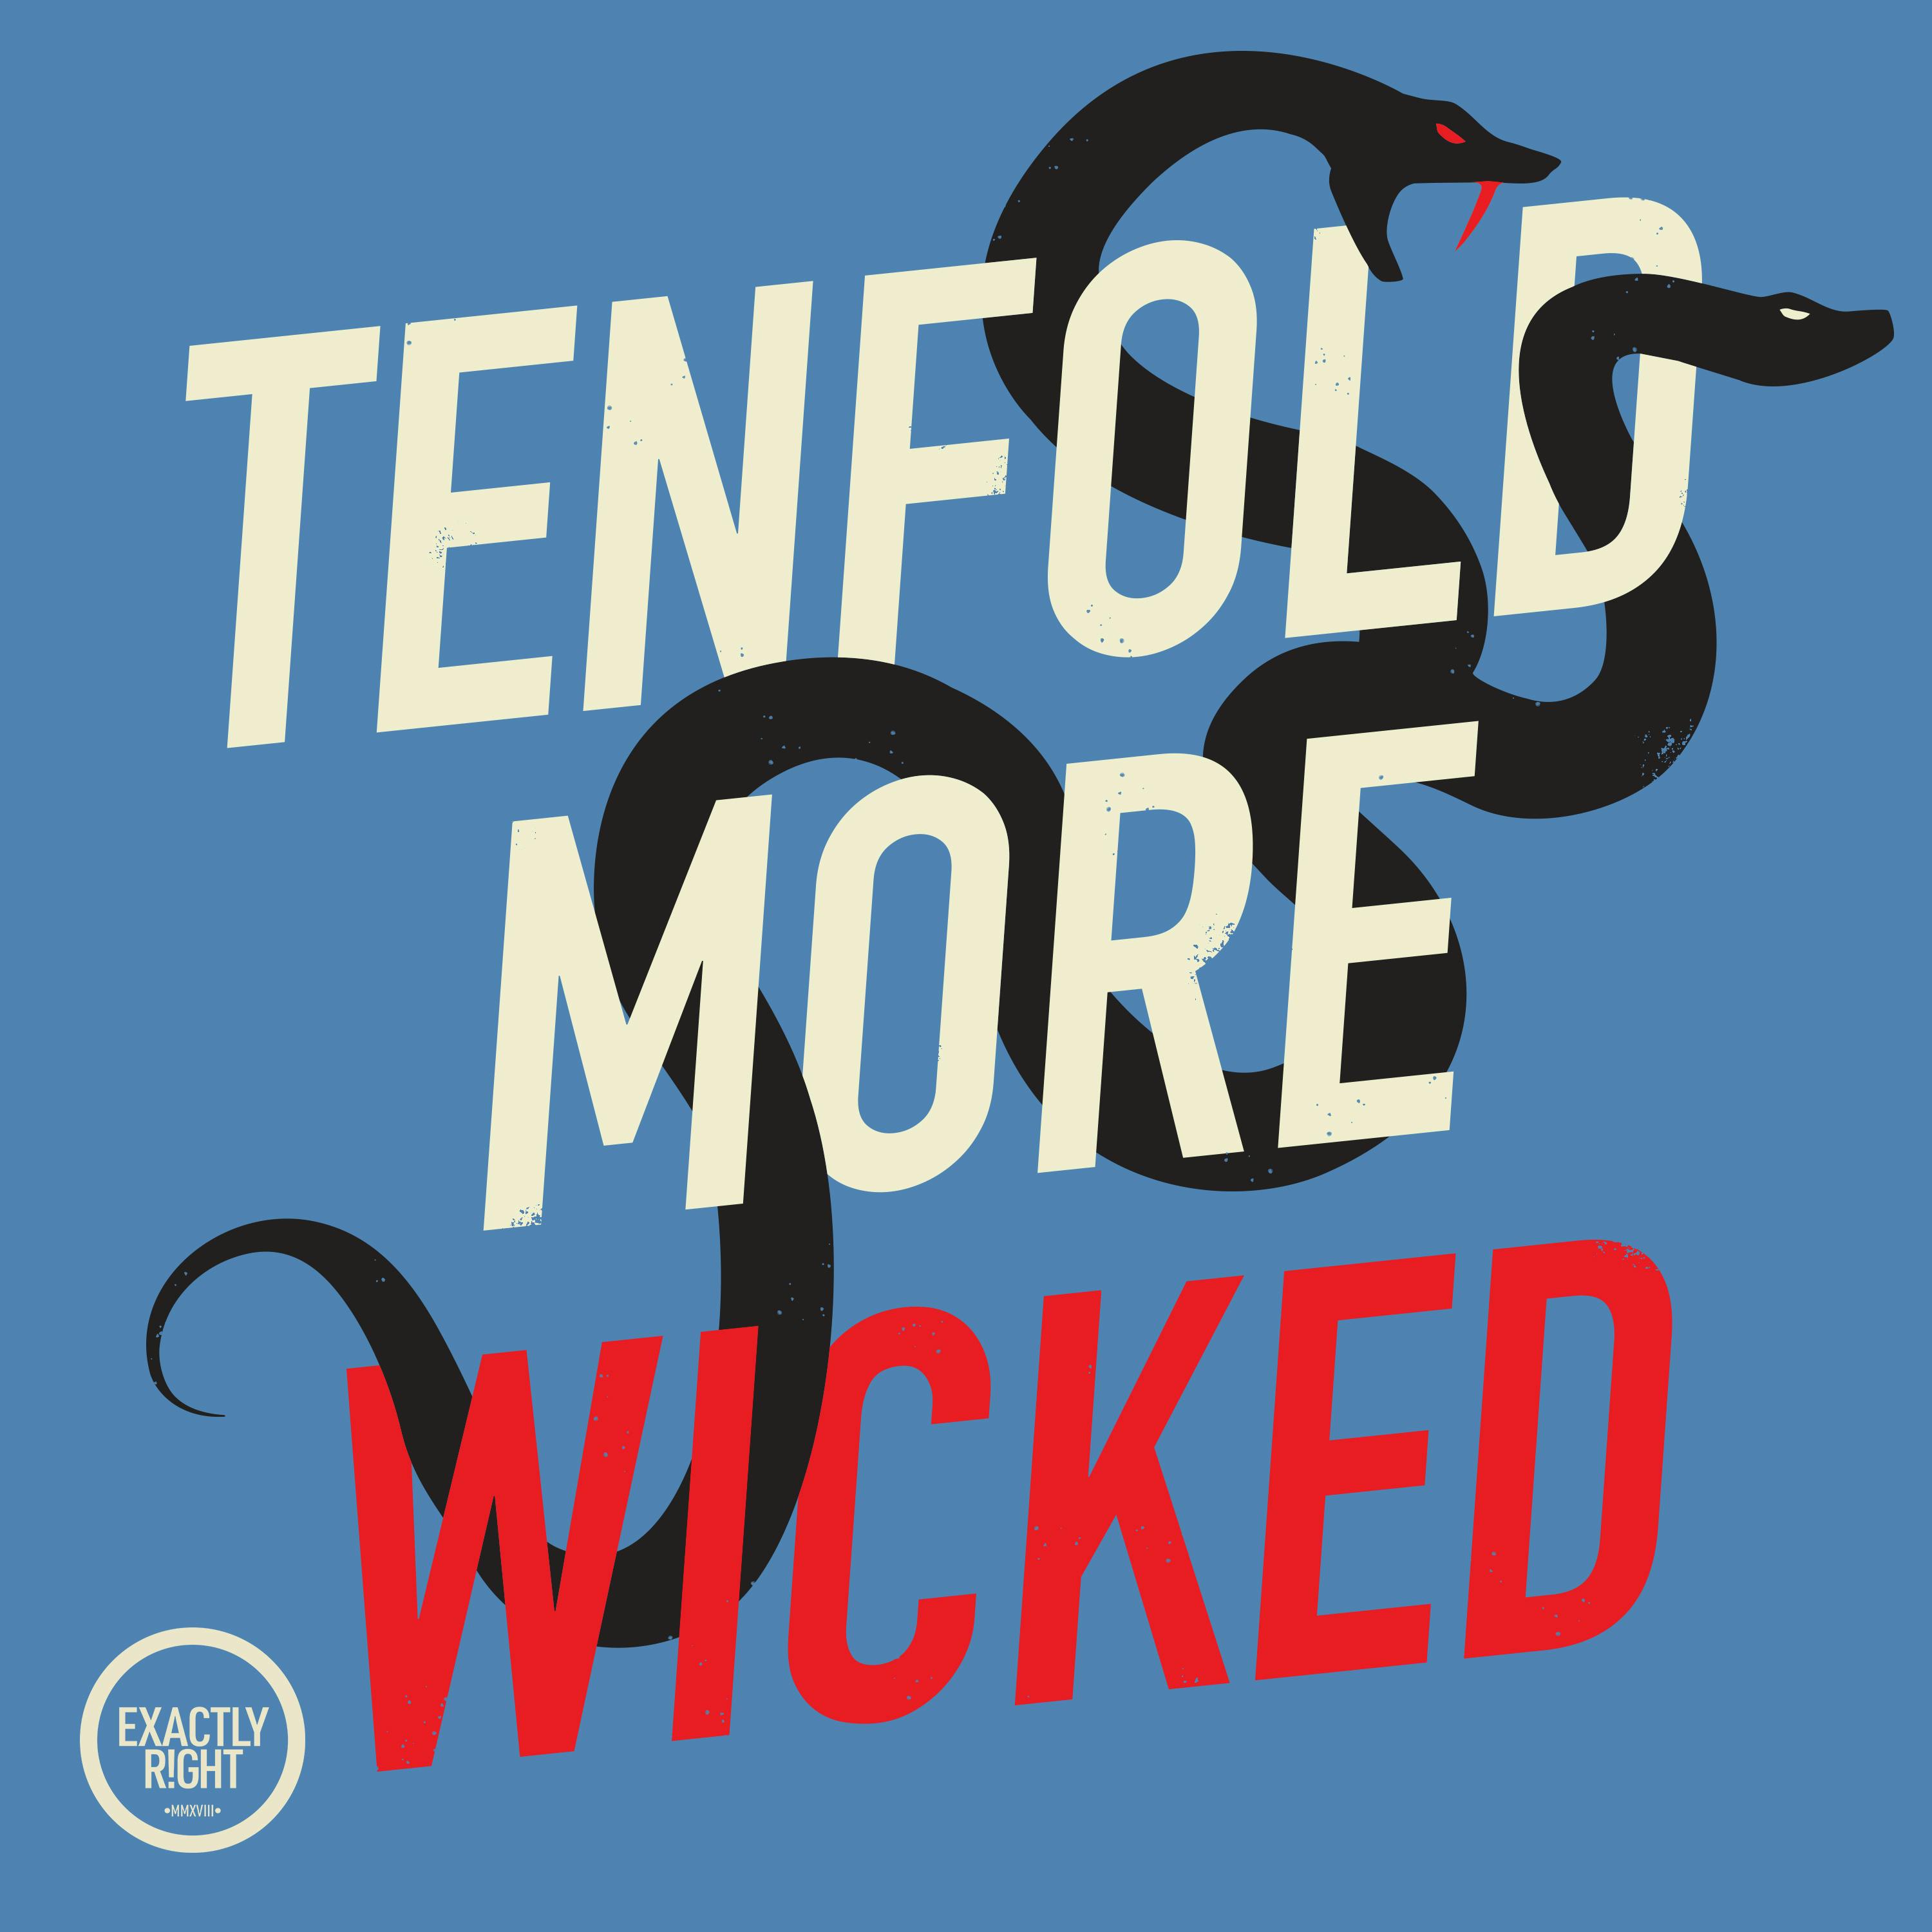 Tenfold More Wicked - Fire and Brimstone:  A Wounded Family